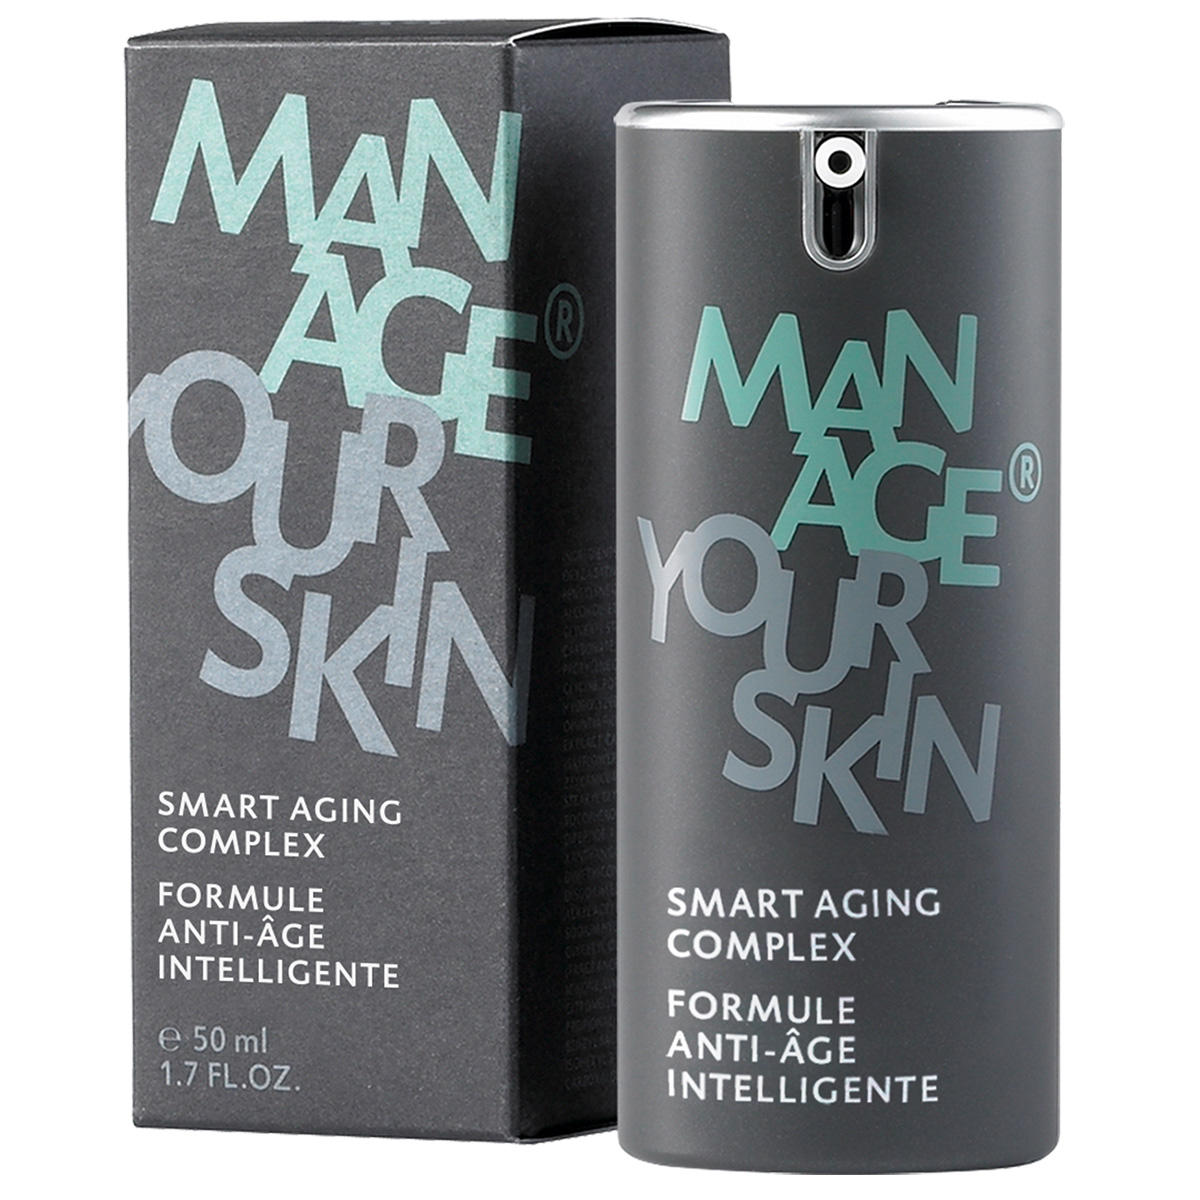 Manage Your Skin SMART AGING COMPLEX 50 ml - 2